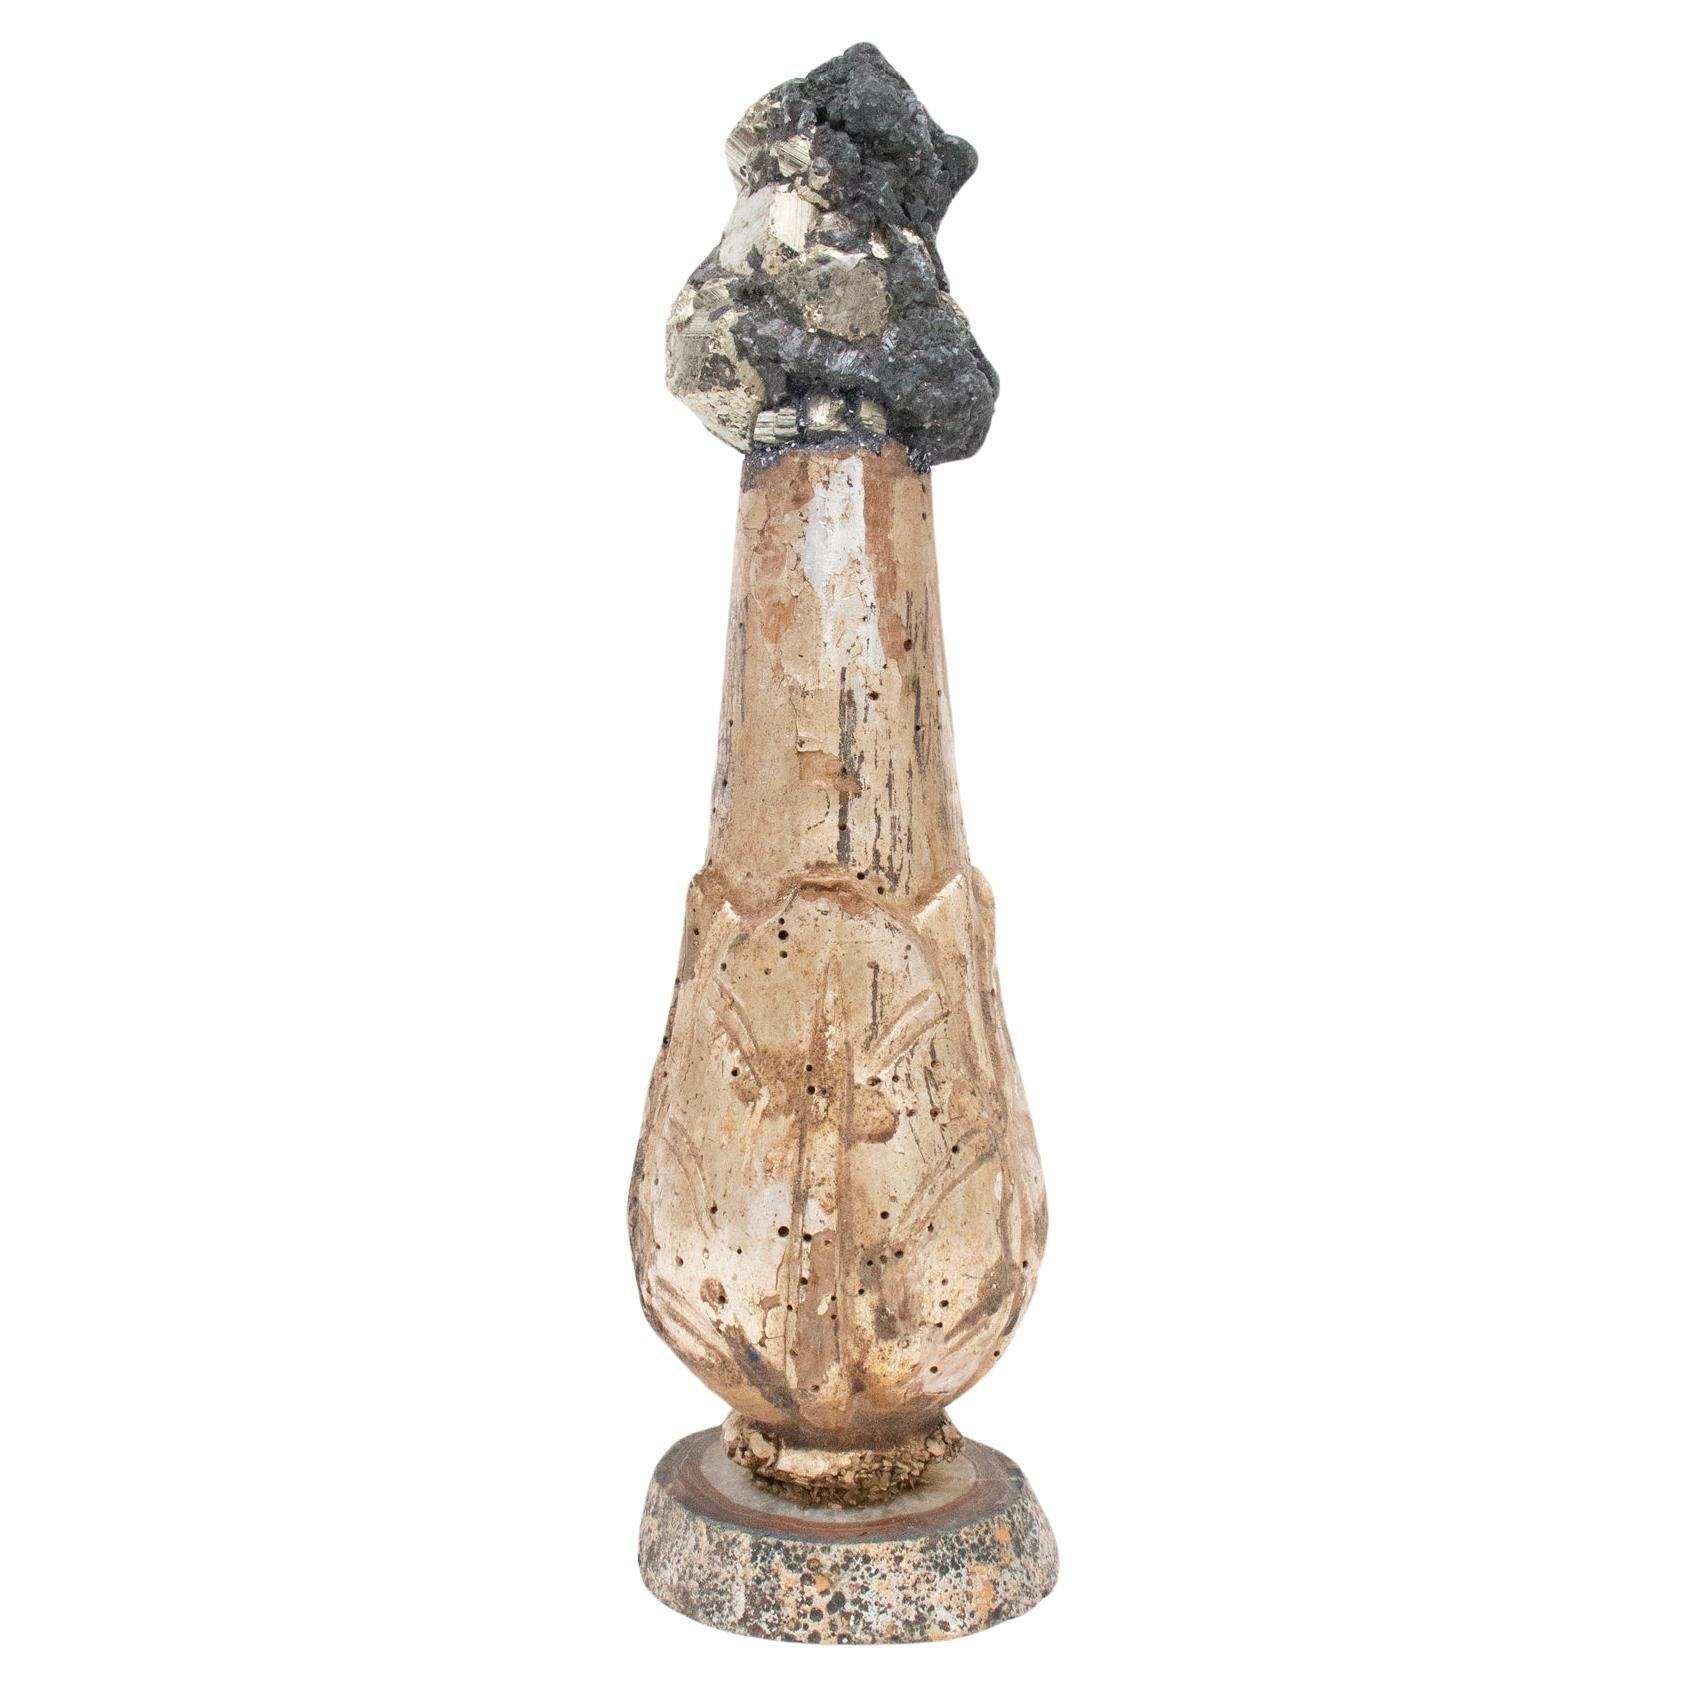 18th Century Italian Gilded Candlestick Fragment with Pyrite in Matrix on Agate